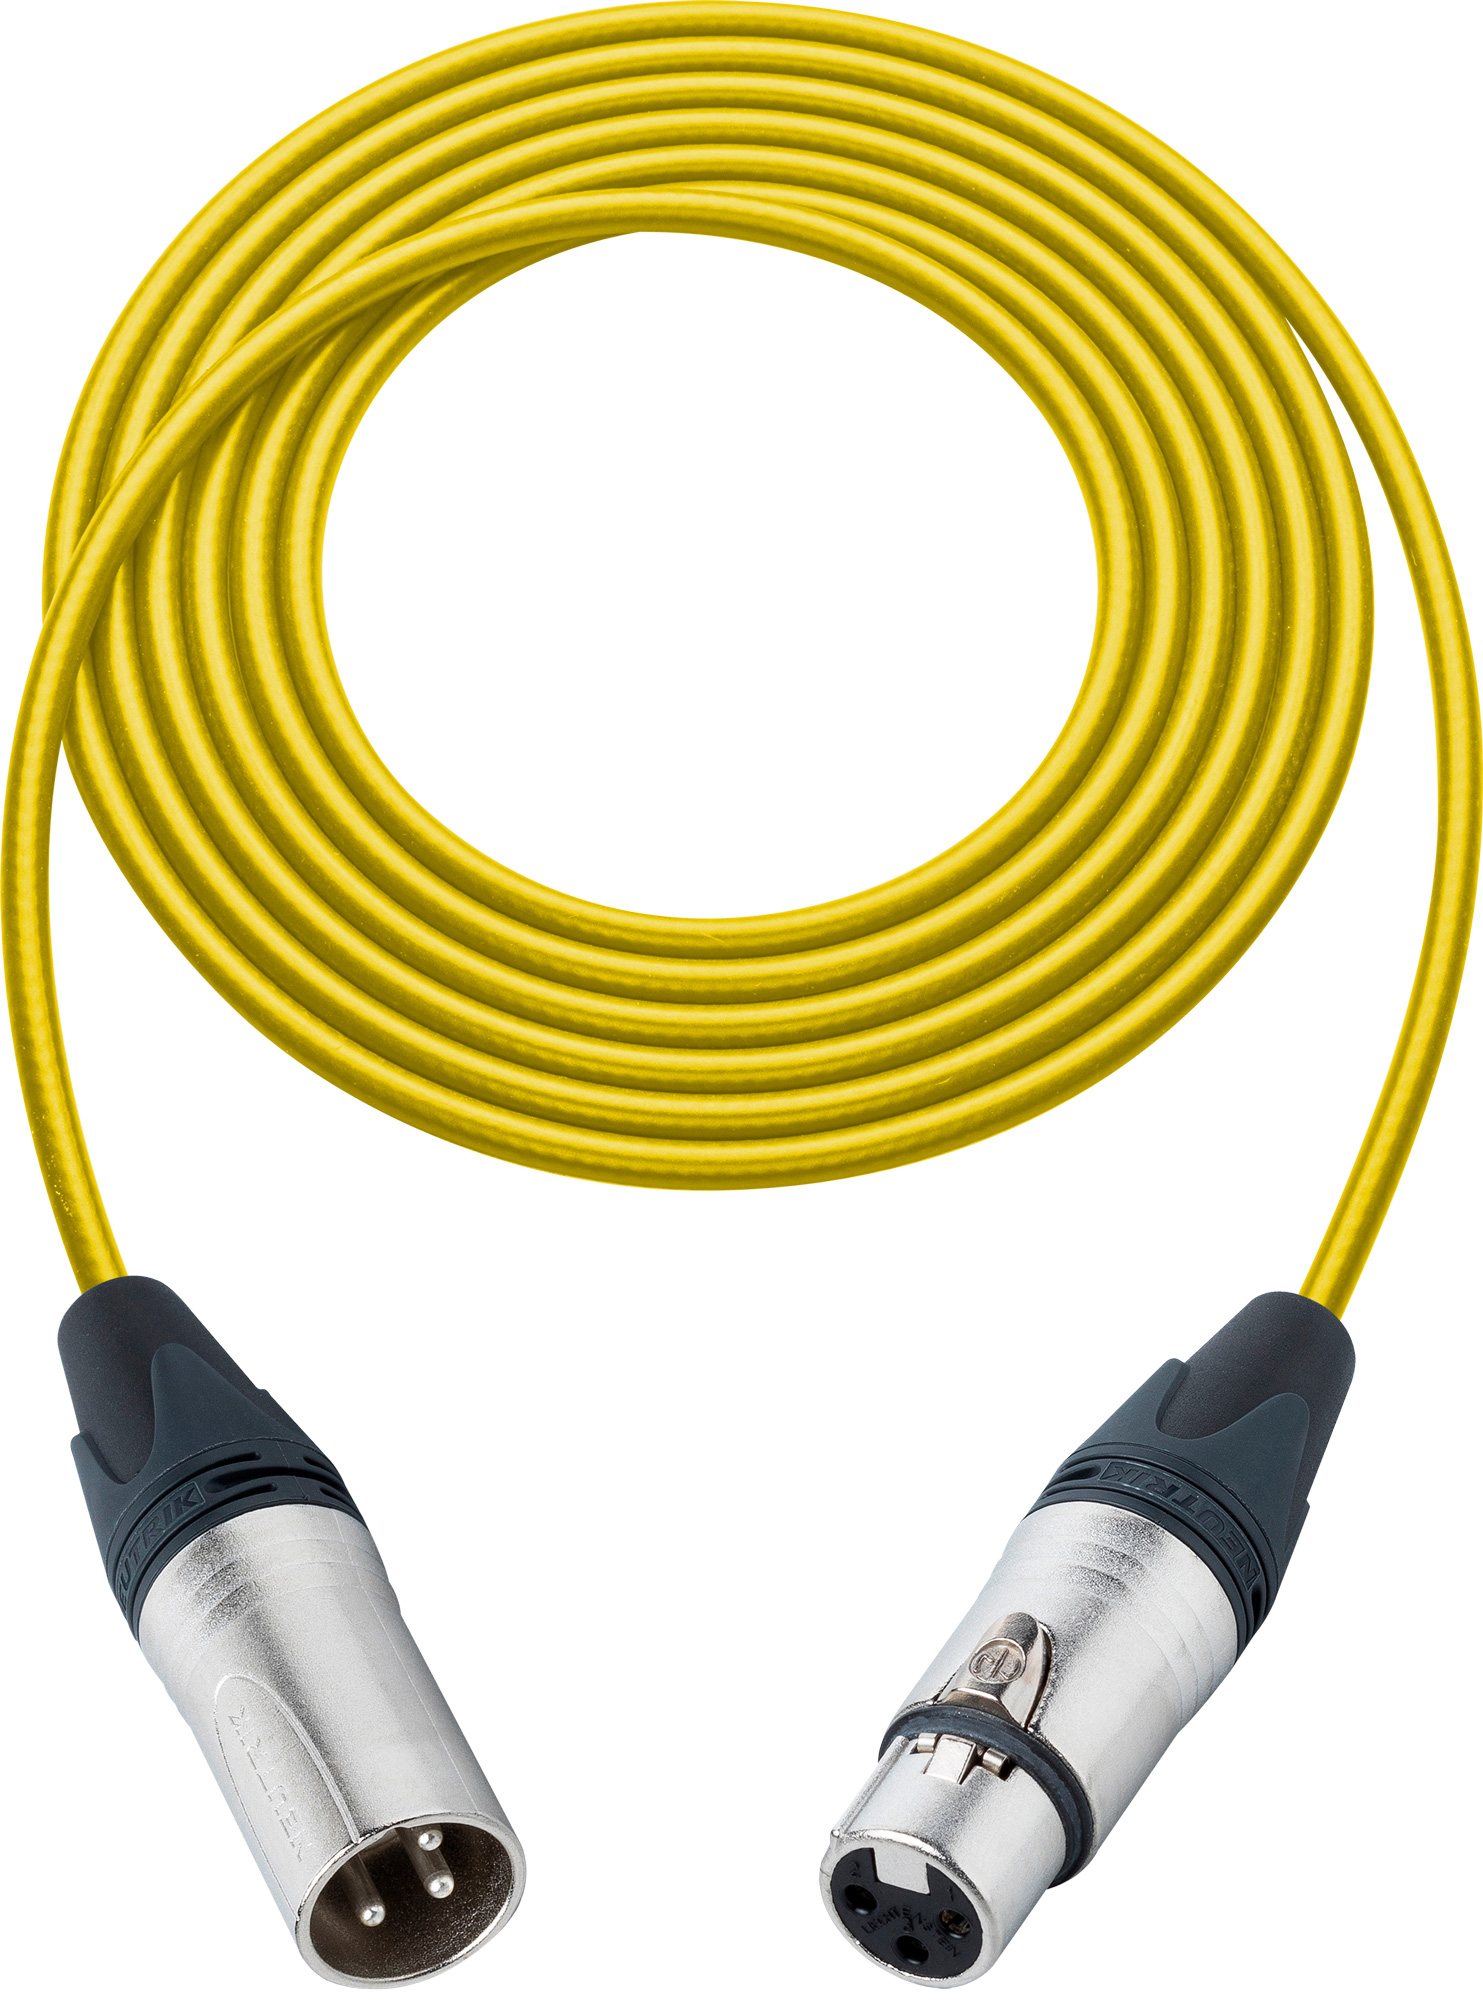 Pro Stage Series XLR Cable - 75 feet YELLOW L2-75XXJYW